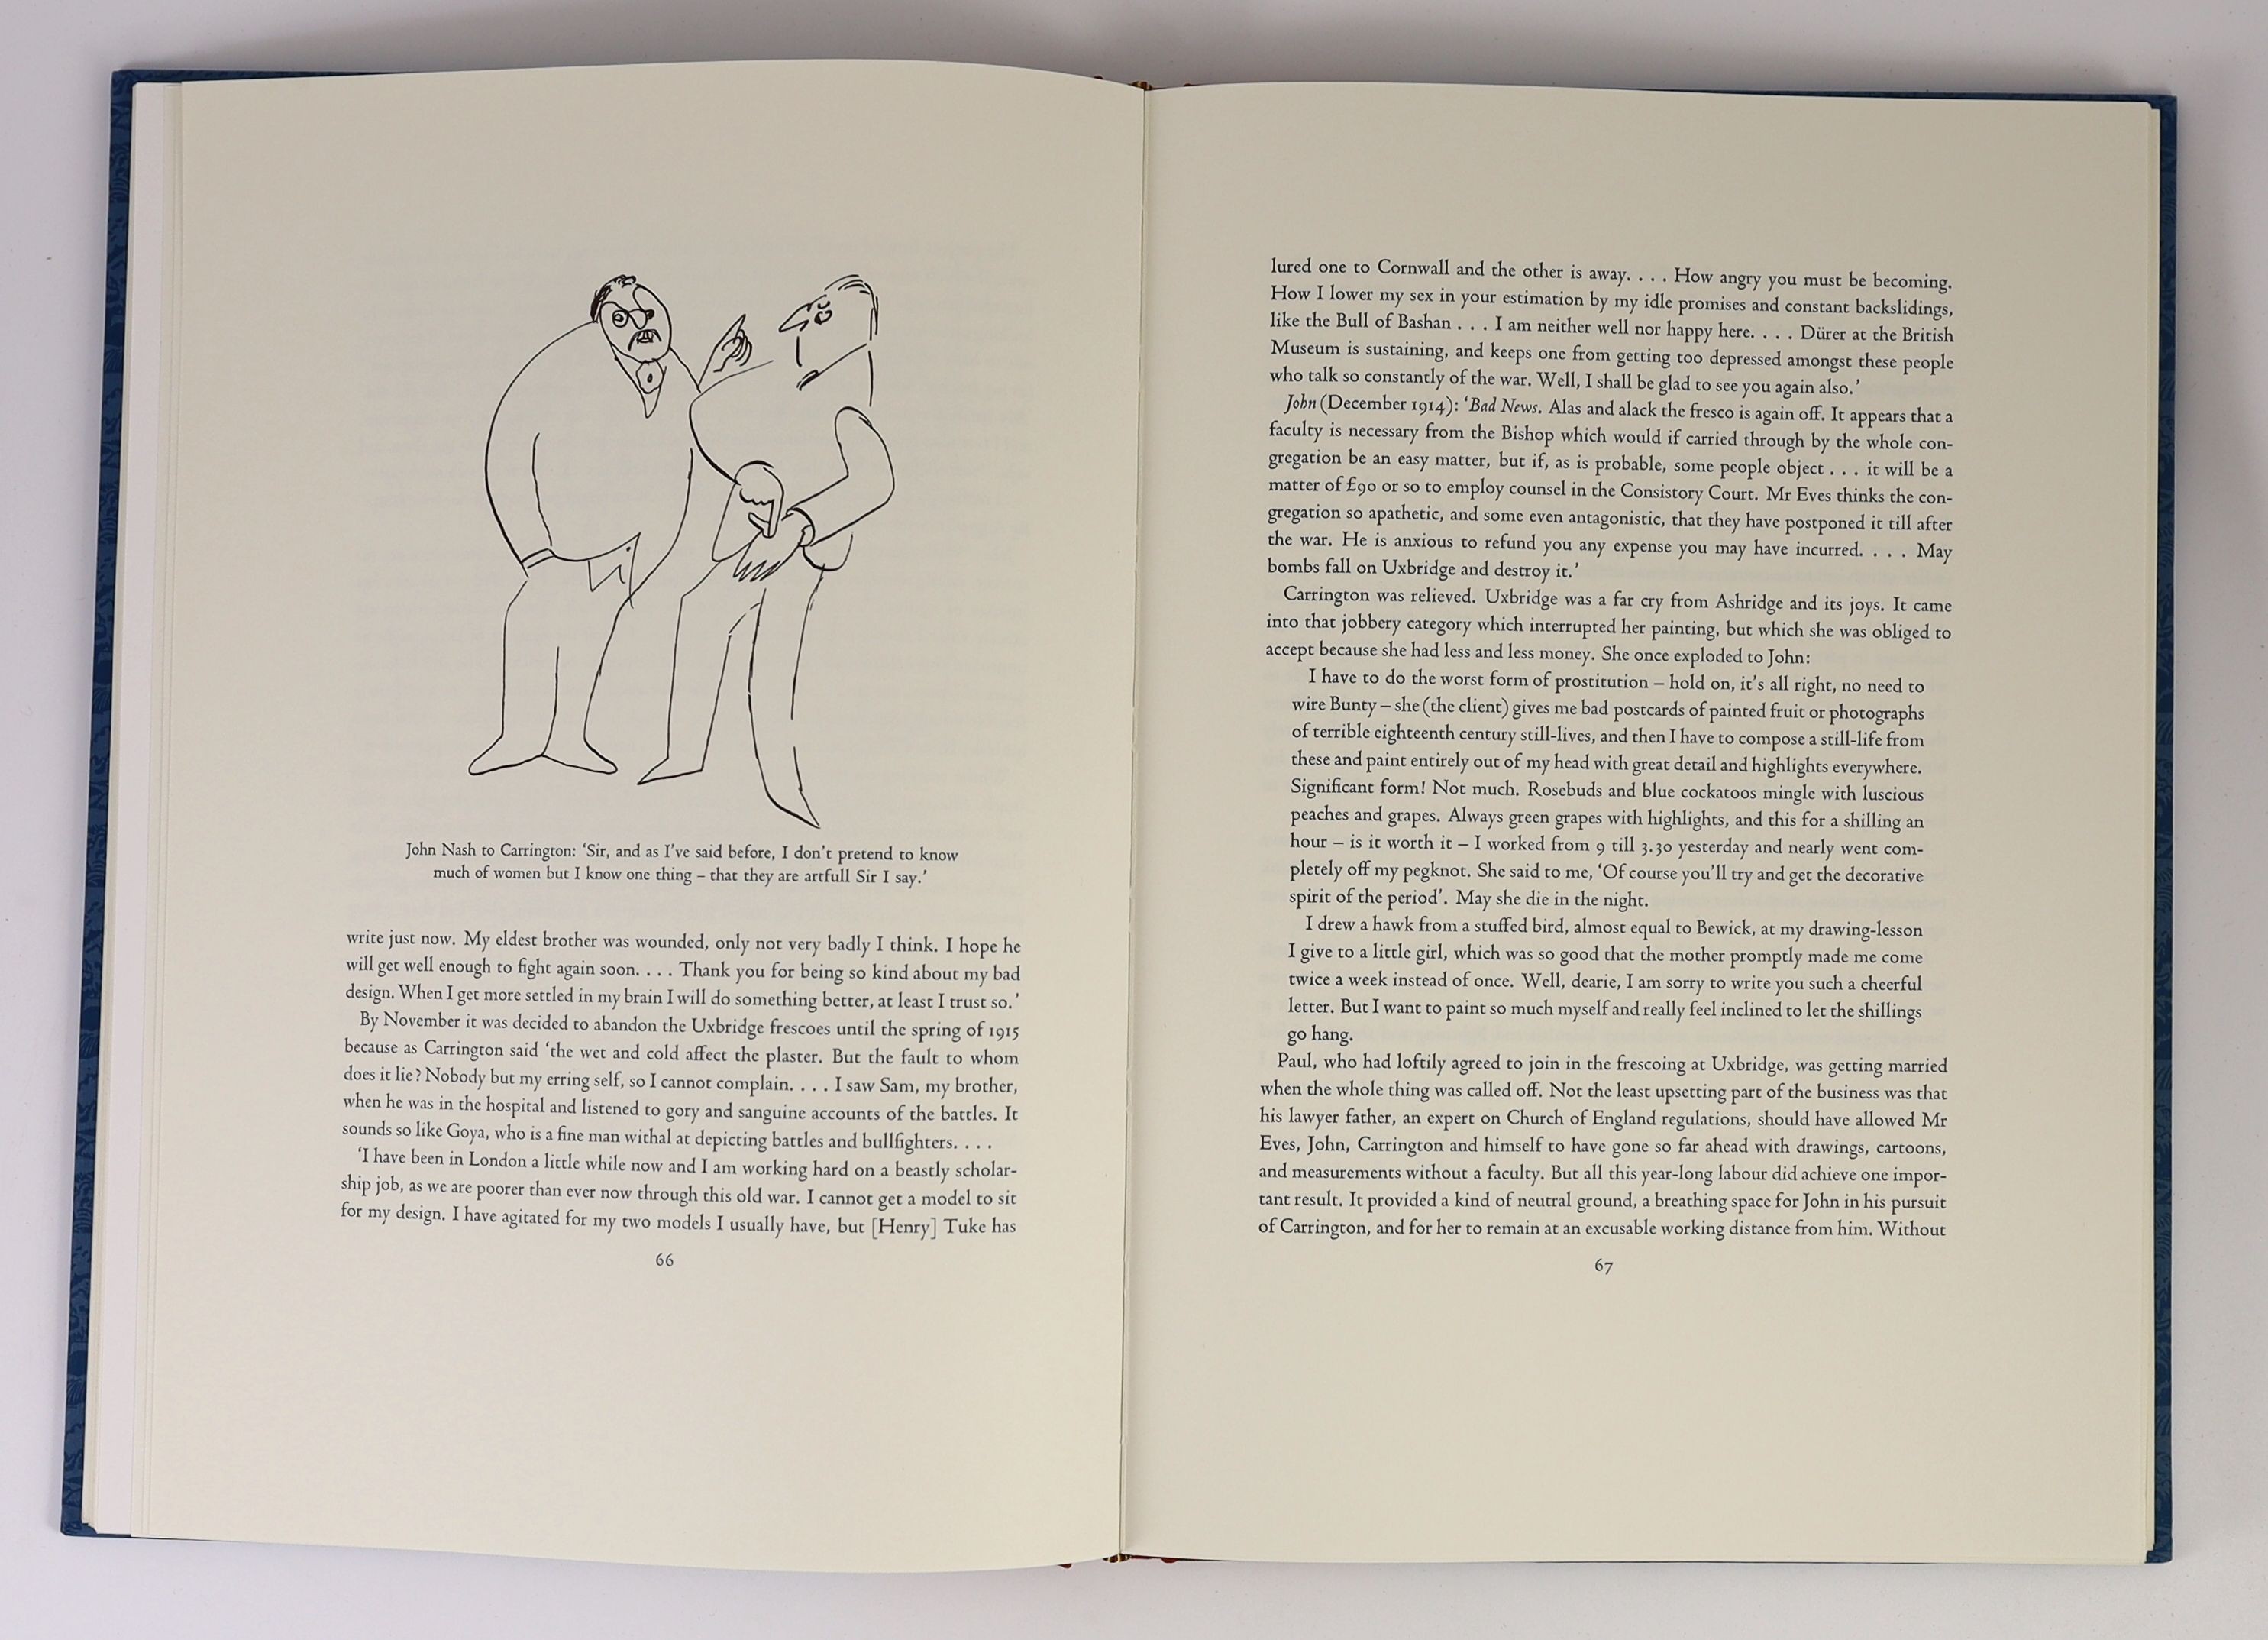 Blythe, Ronald - First Friends. Paul and Bunty, John and Christine - and Carrington. Limited edition, of 300 copies. Adorned with numerous illustrations, many of which are tipped-in, coloured and one folding. Quarter clo